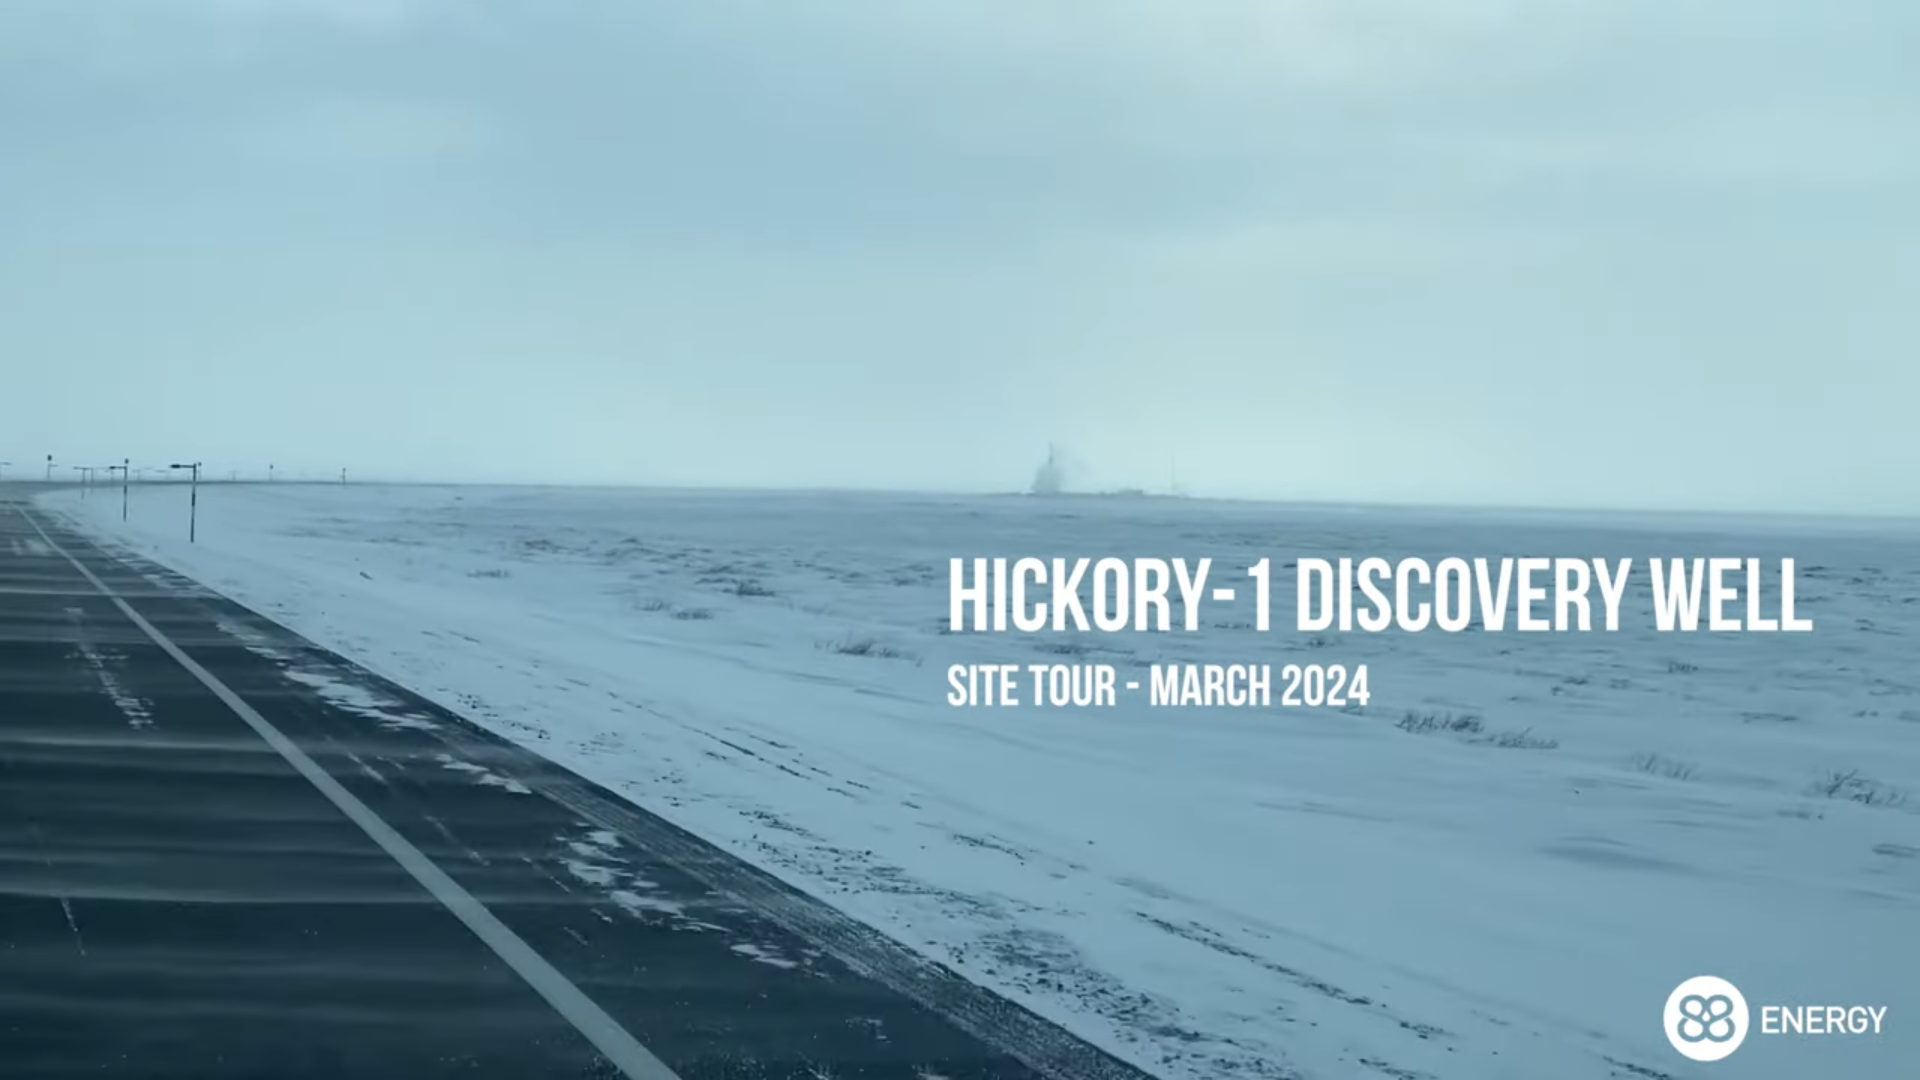  88 Energy - Hickory-1 Discovery Well: Site Tour March 2024 